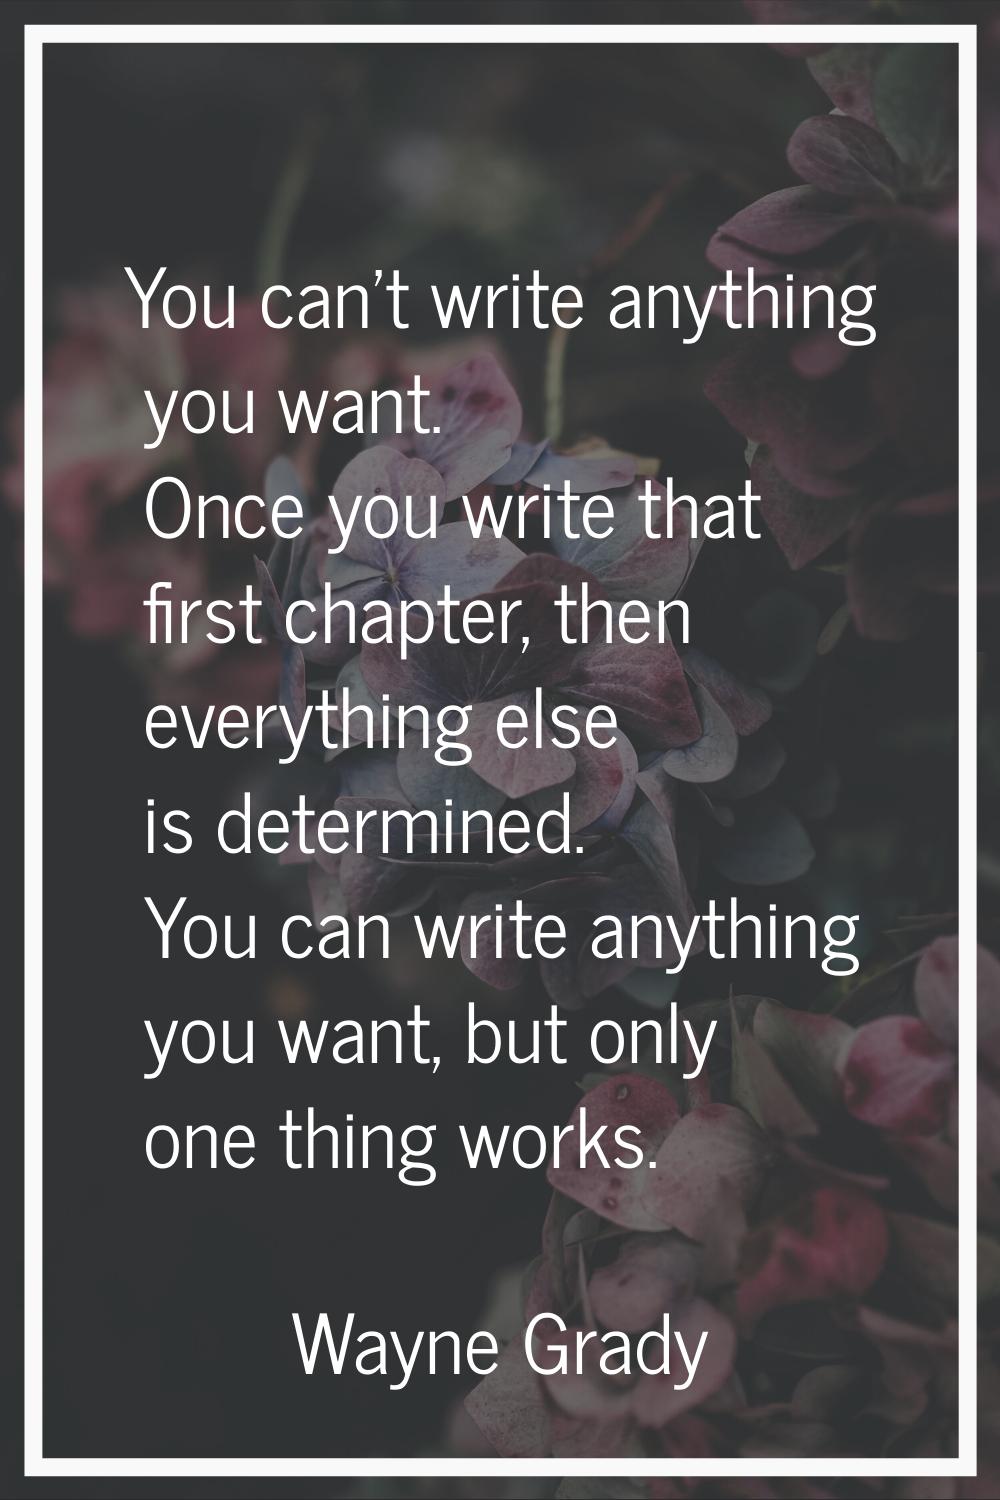 You can't write anything you want. Once you write that first chapter, then everything else is deter